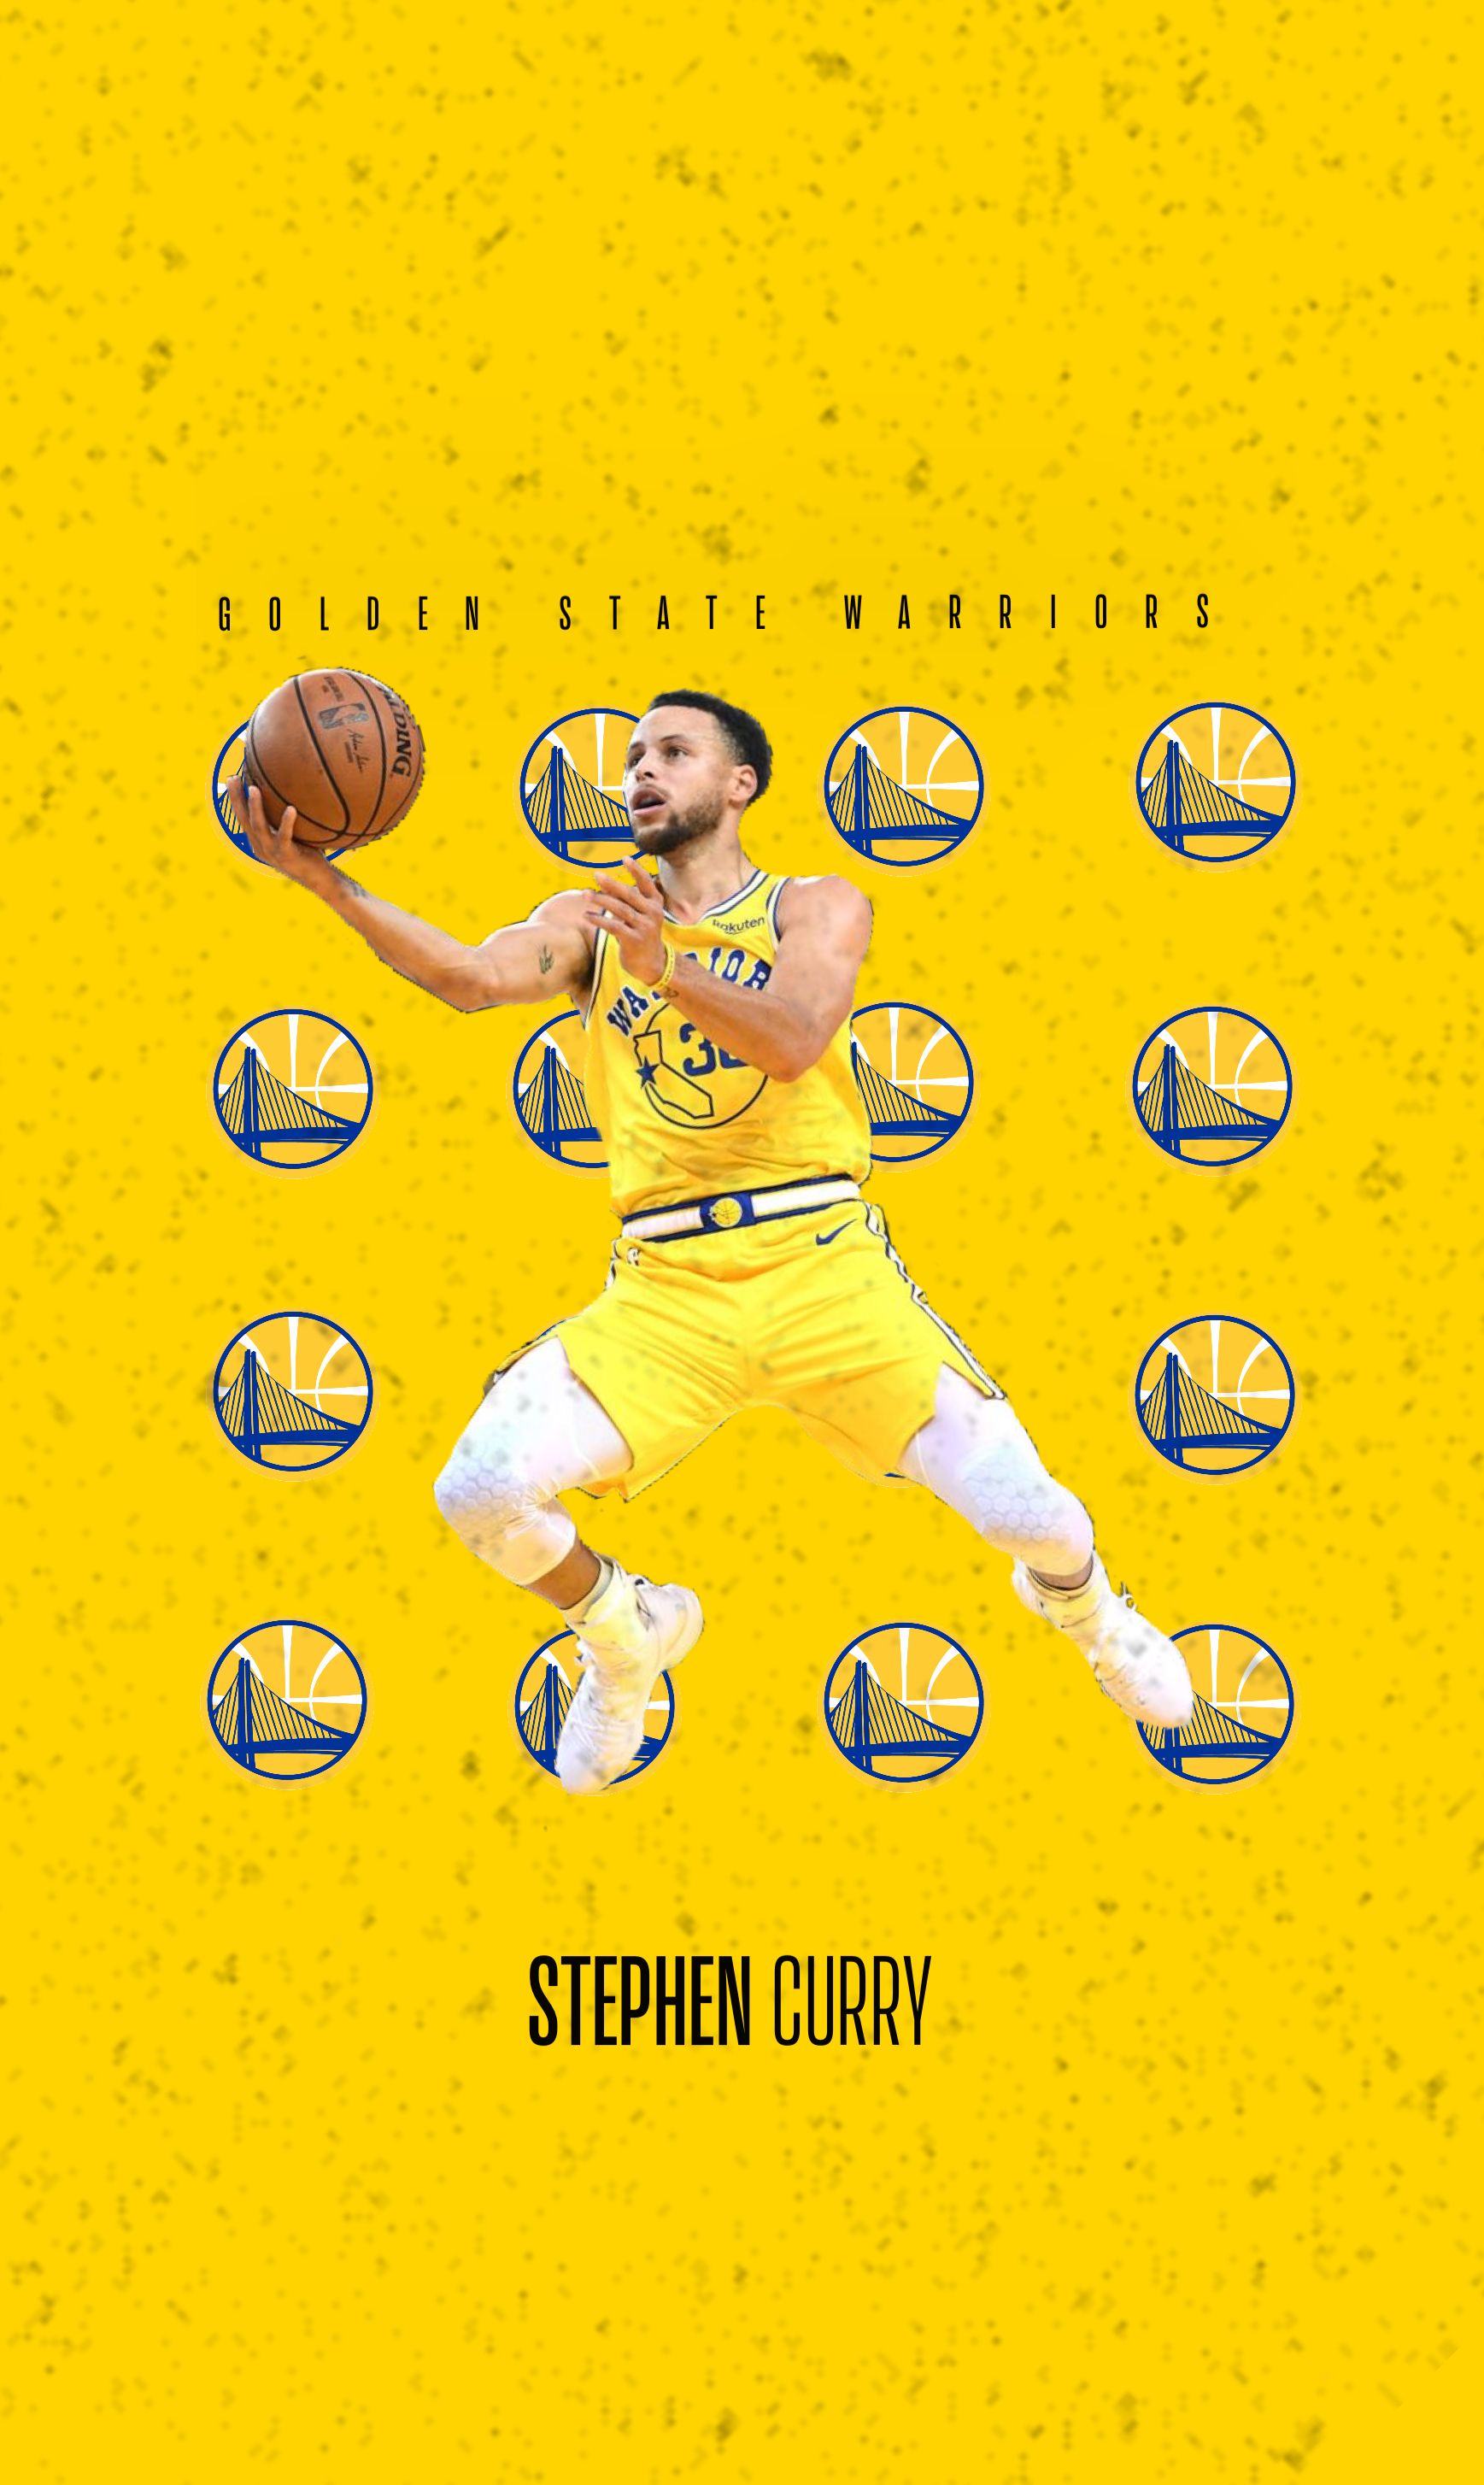 Stephen Curry. Wallpaper. Nba stephen curry, Curry wallpaper, Stephen curry